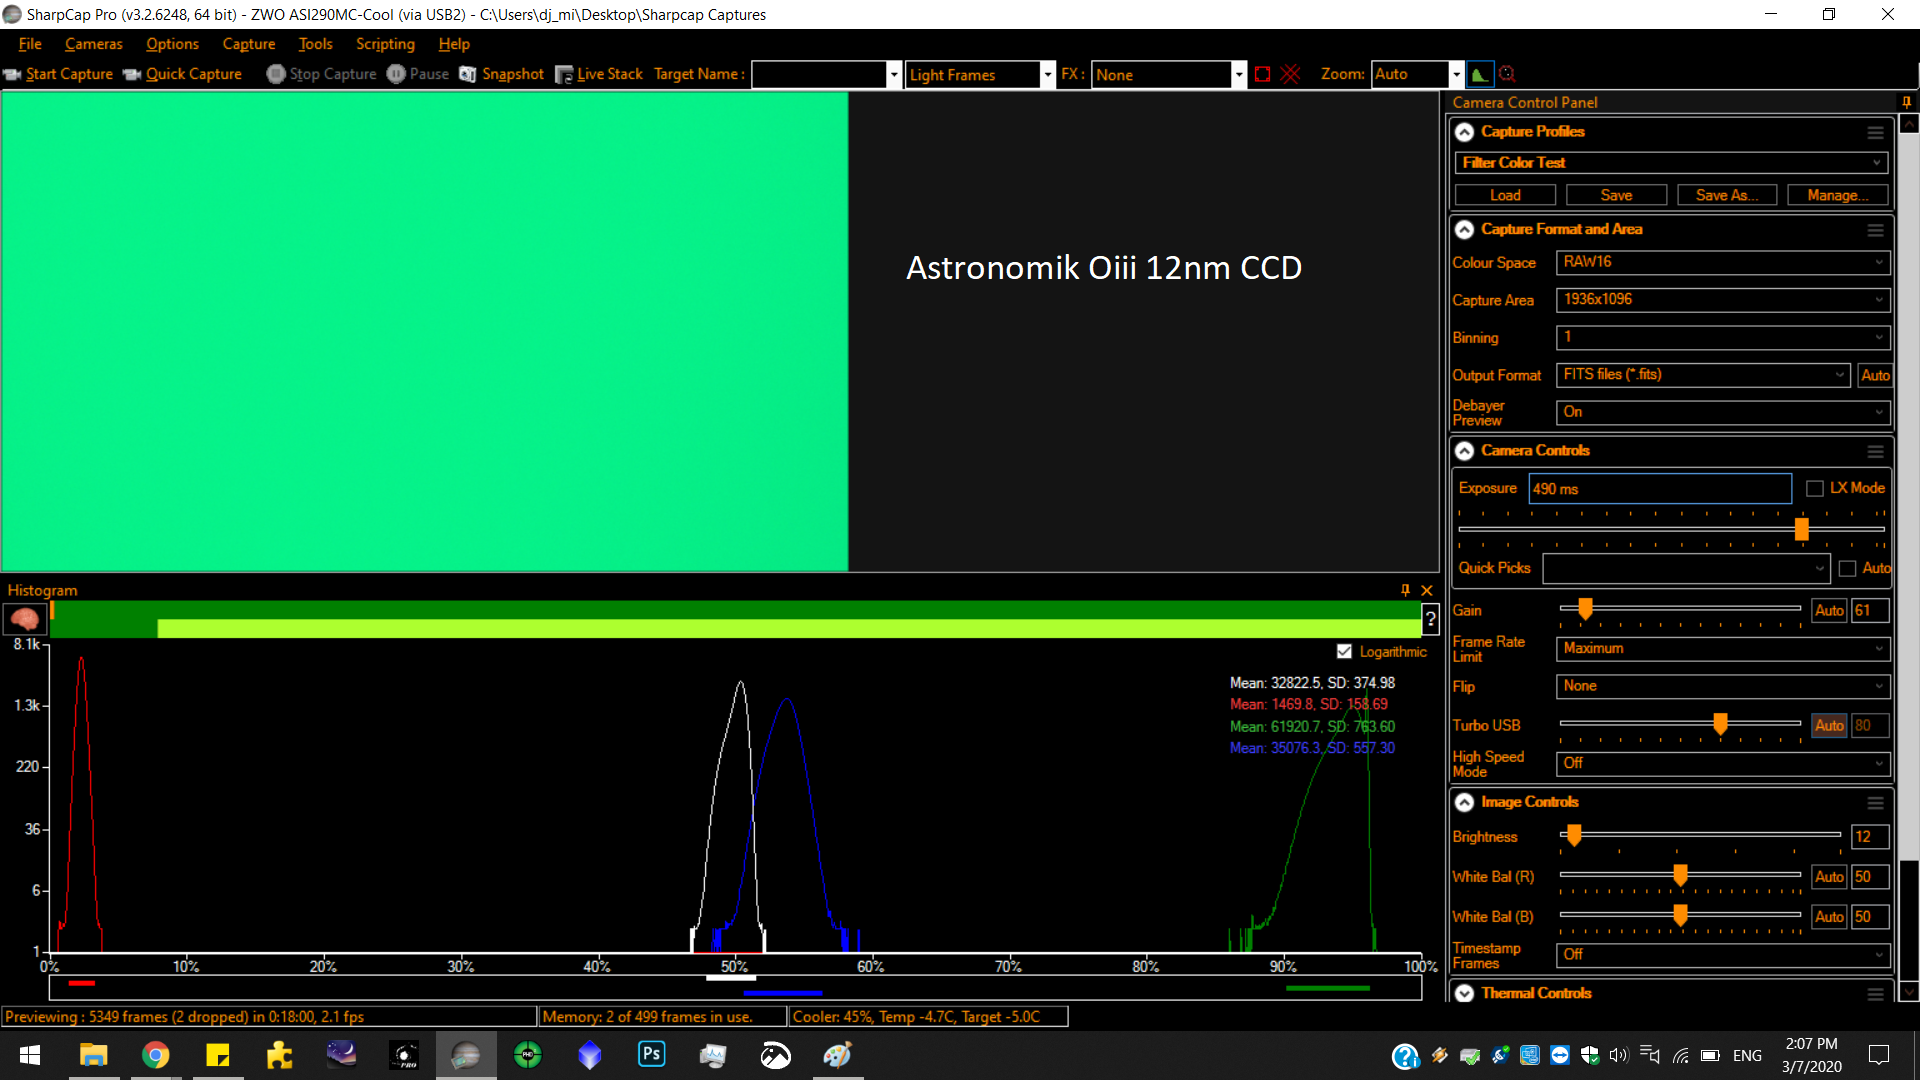 Astronomik_Oiii_12nm_CCD.png